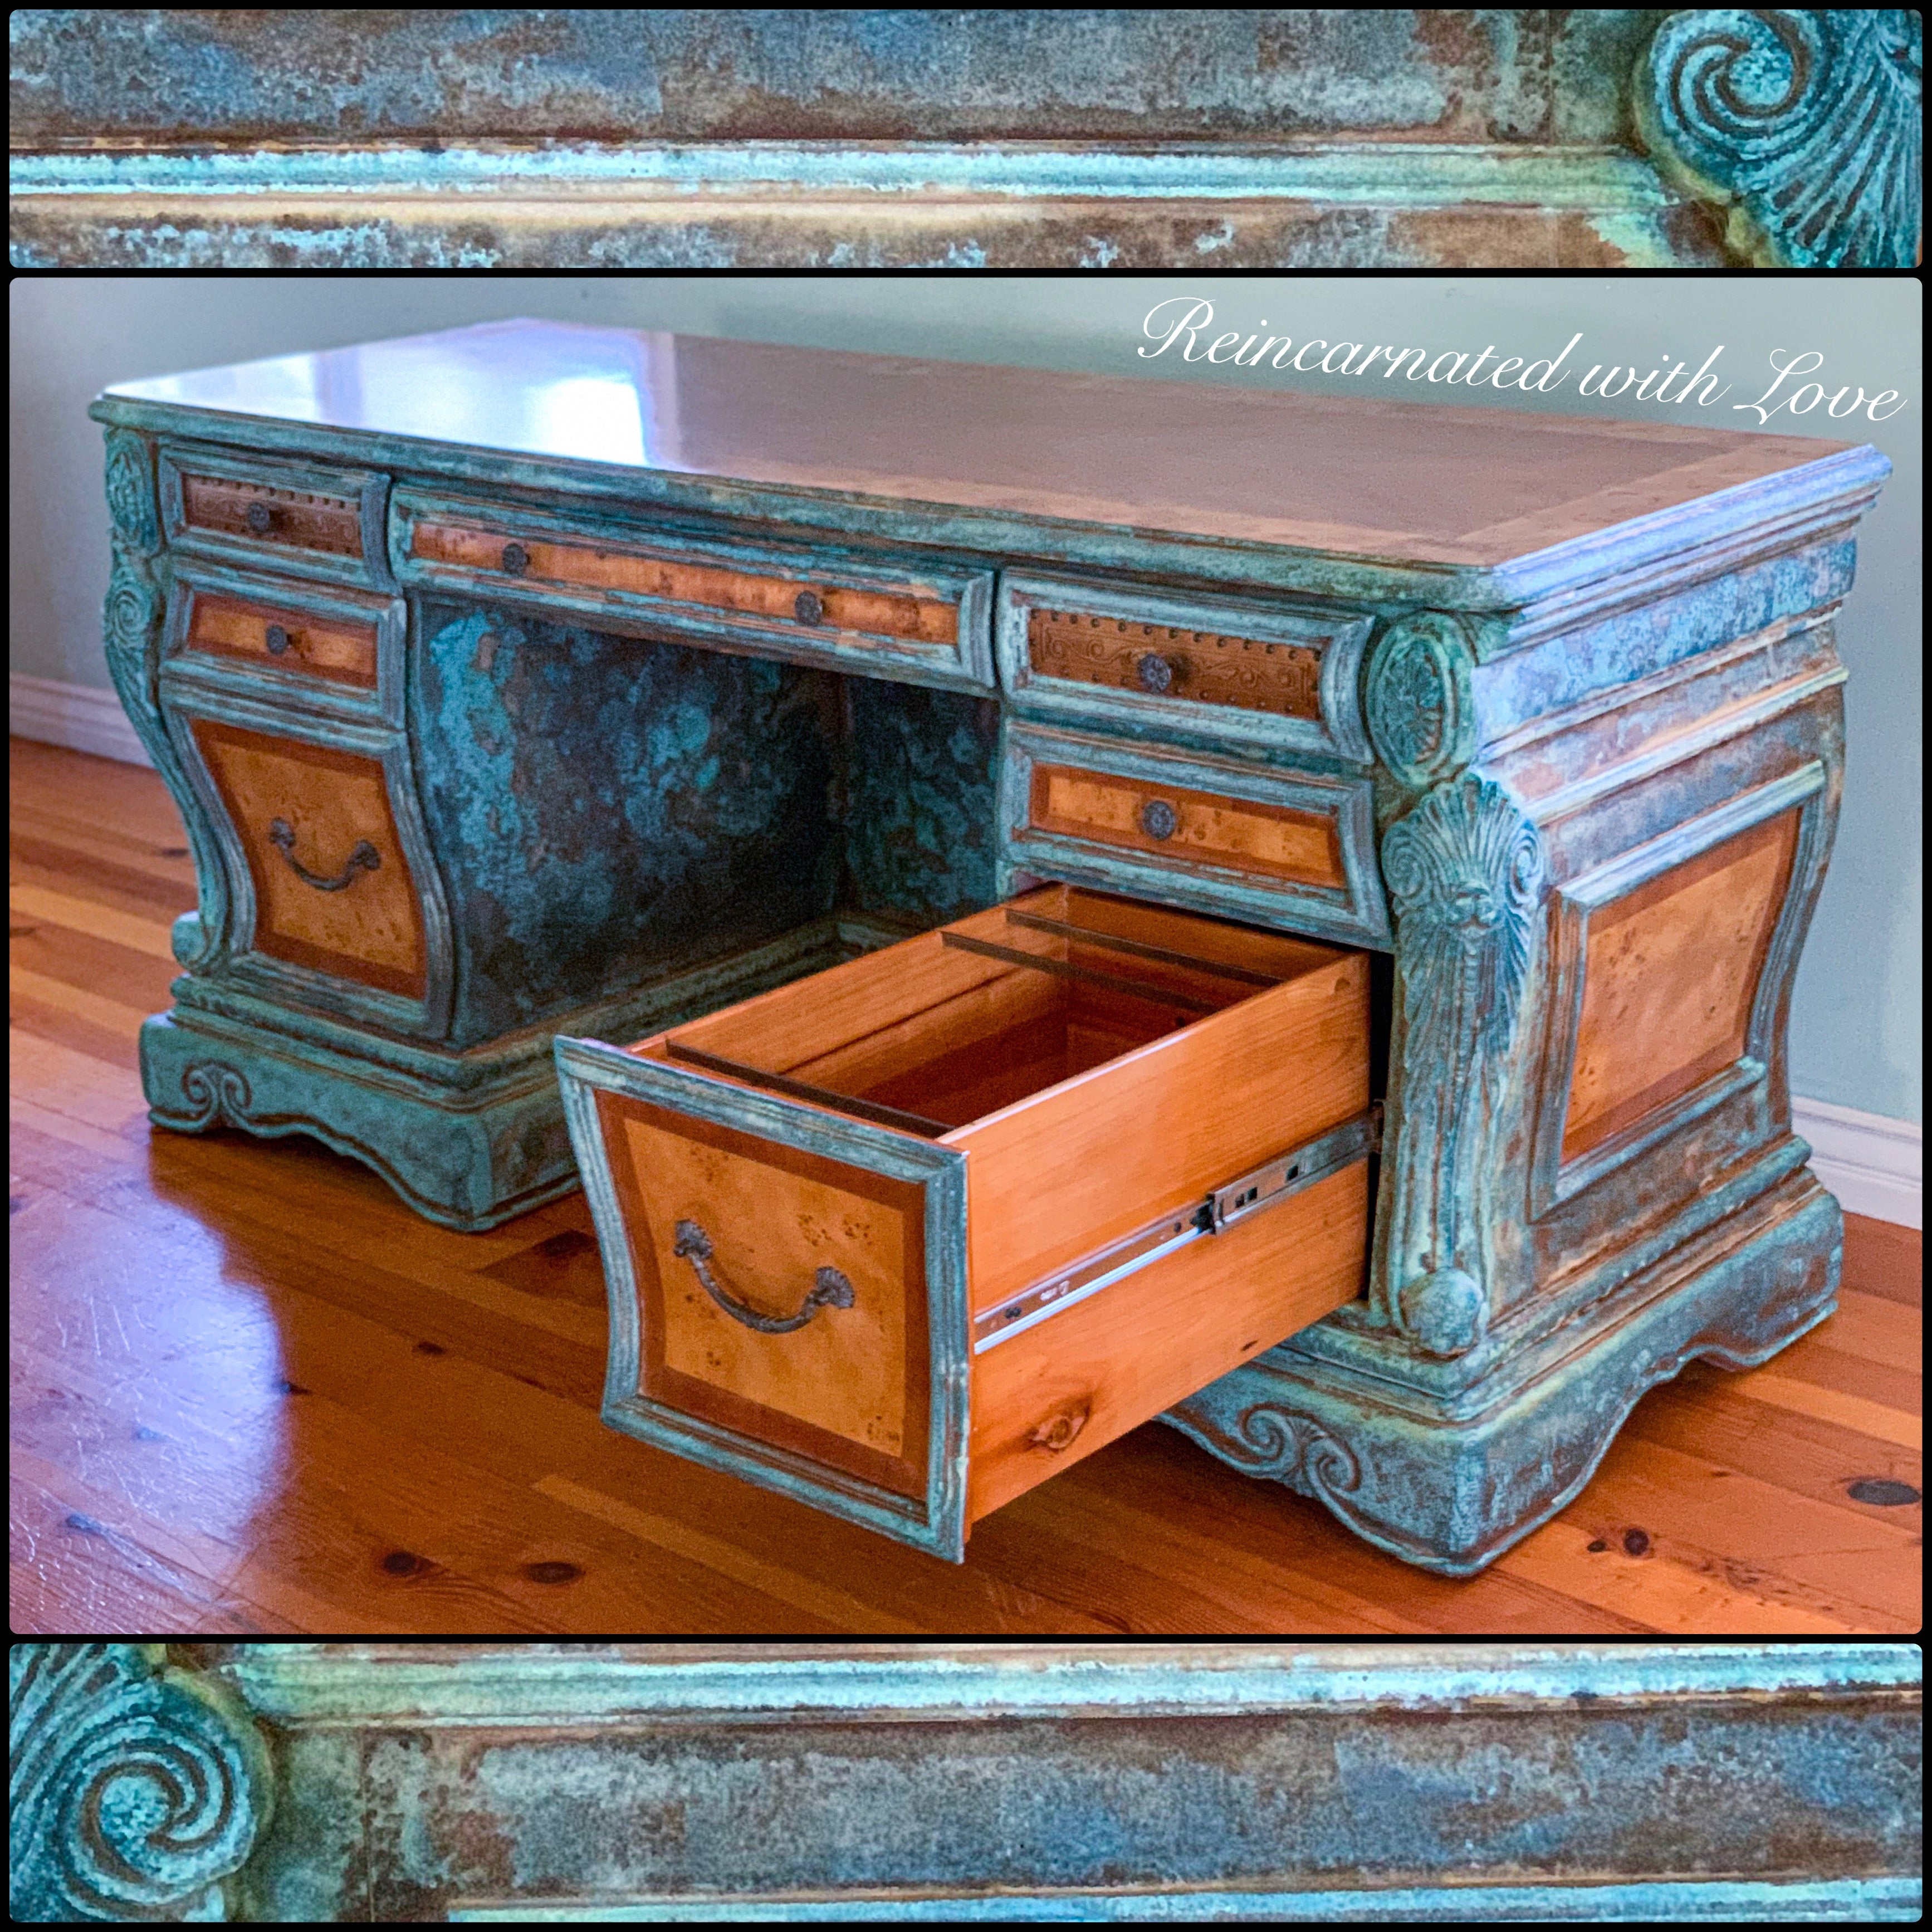 An art nouveau style desk, with a blue & green, patina finish, shown with a large drawer open, displaying storage capacity.